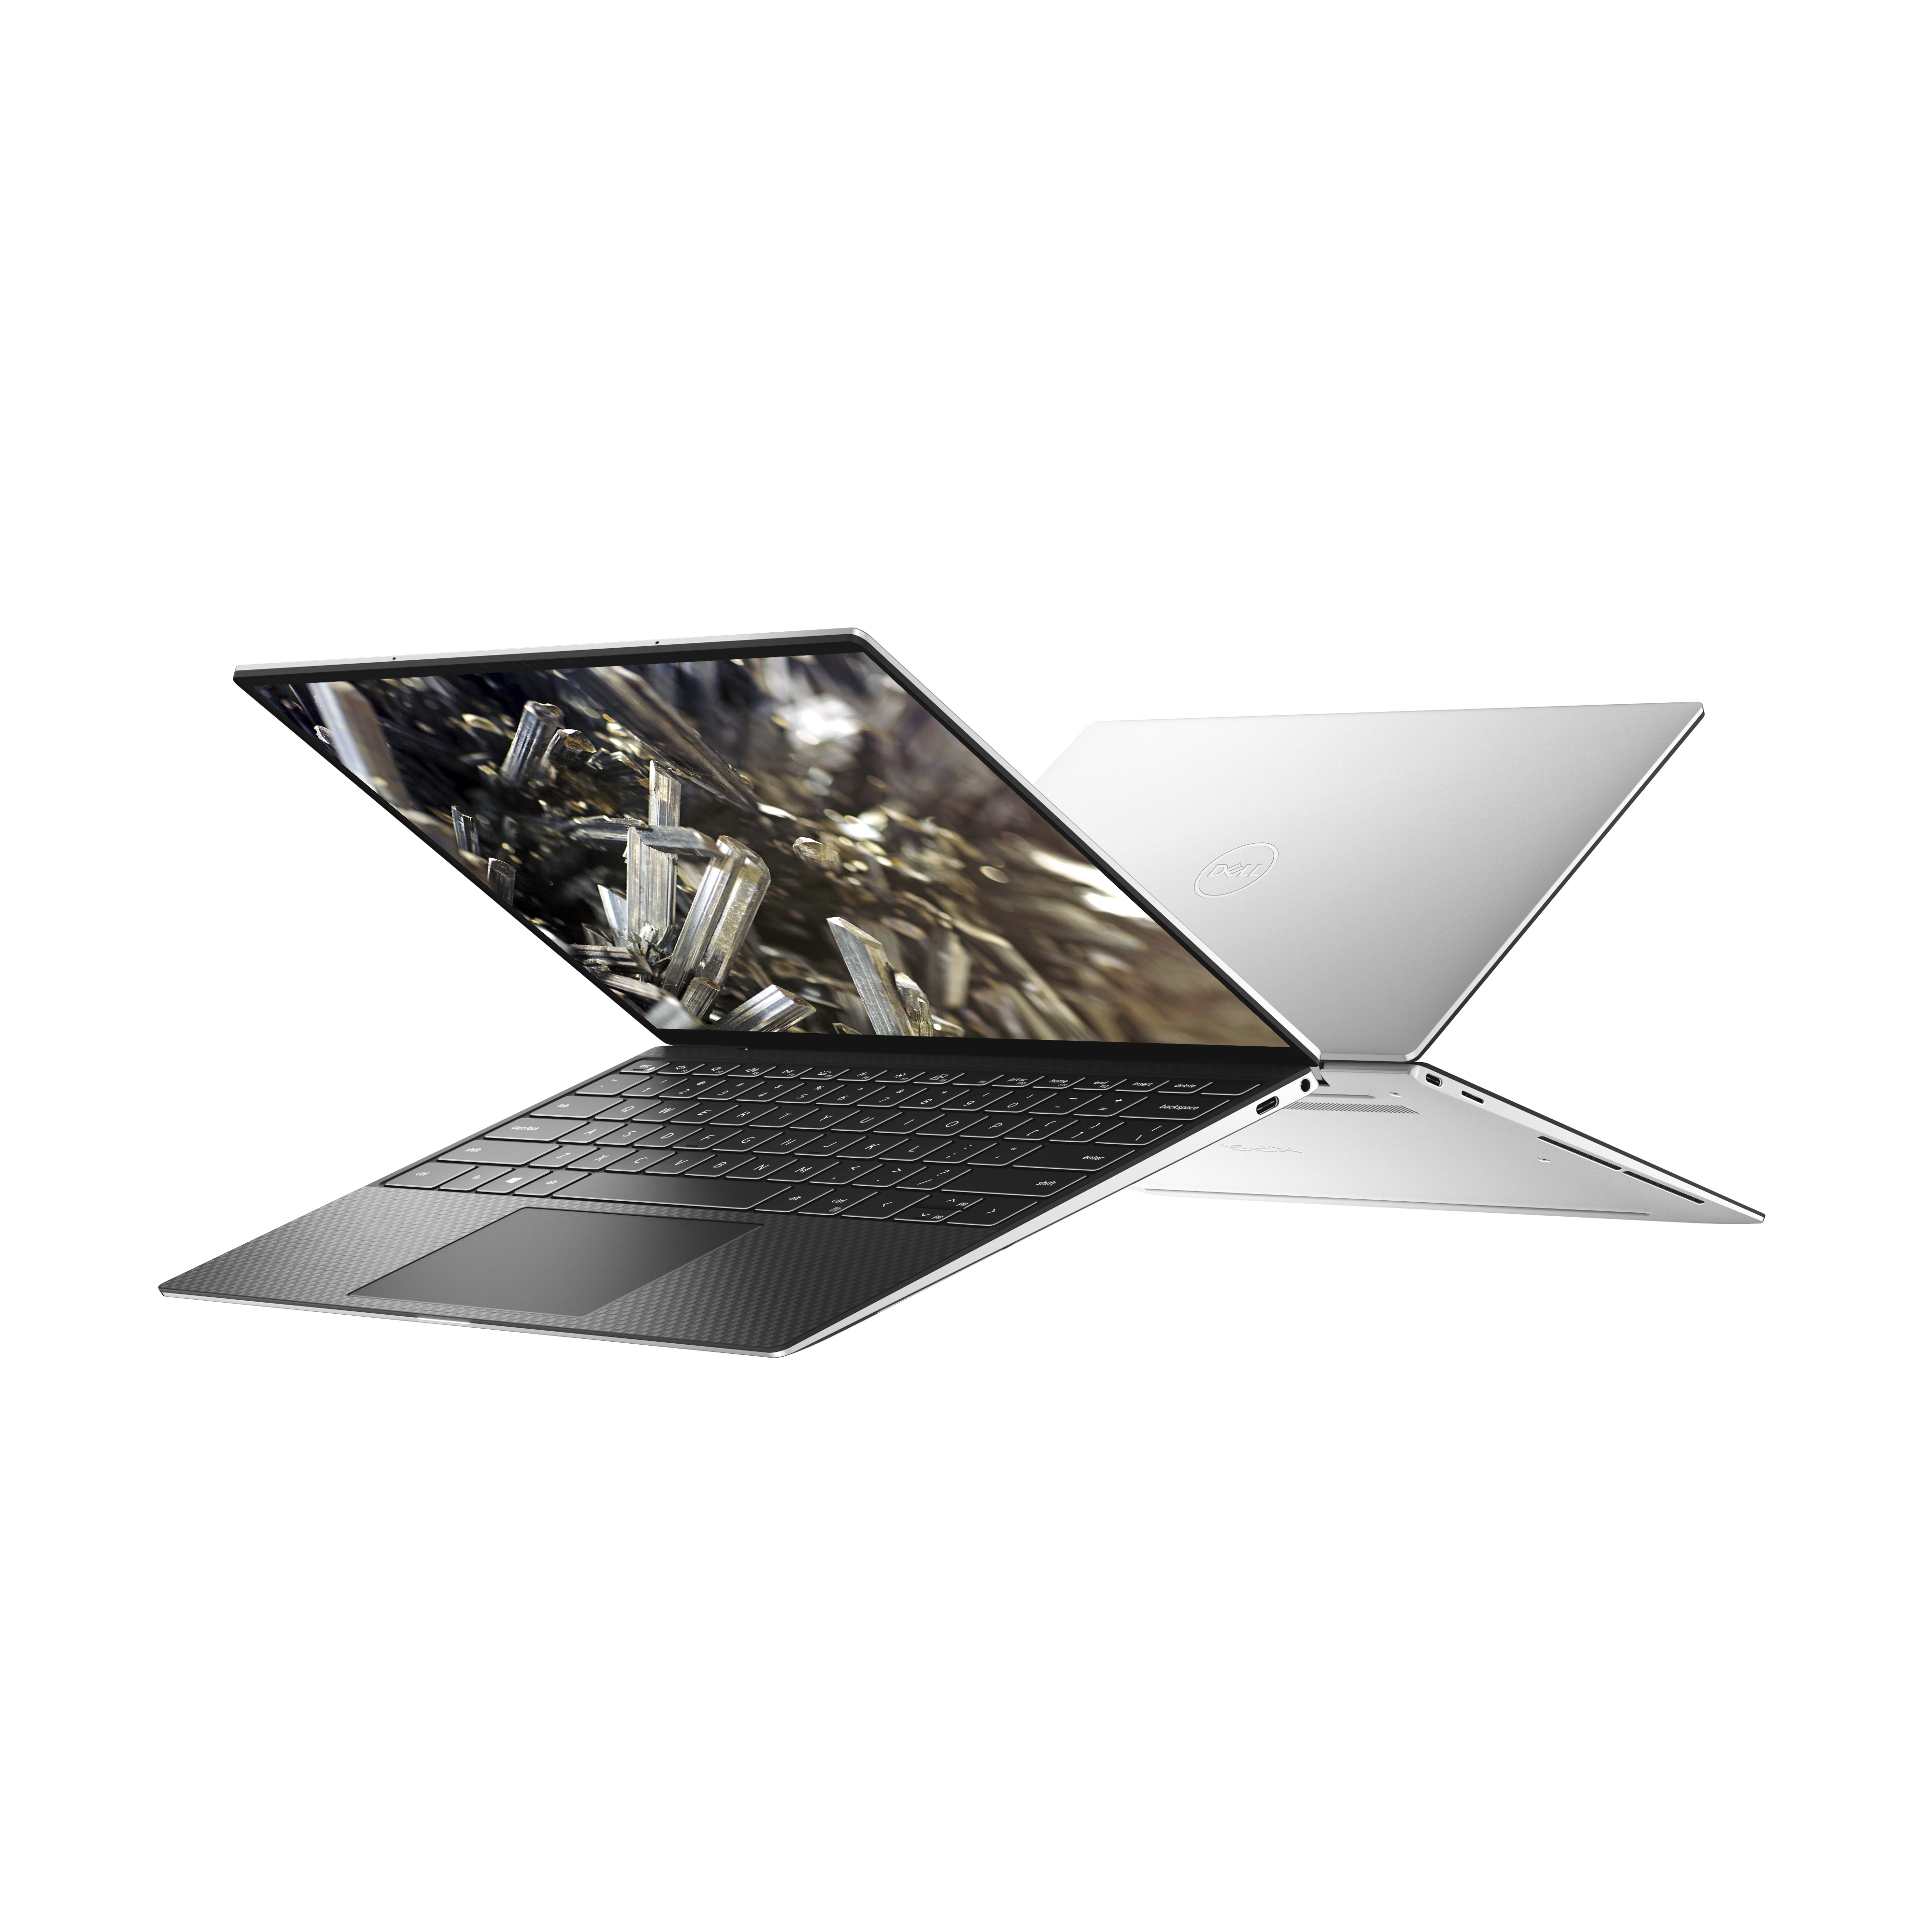 Ультрабук. Dell XPS 13 2020. Dell XPS 13 9310. Dell XPS 13 2021. Dell XPS 13 Ultrabook.